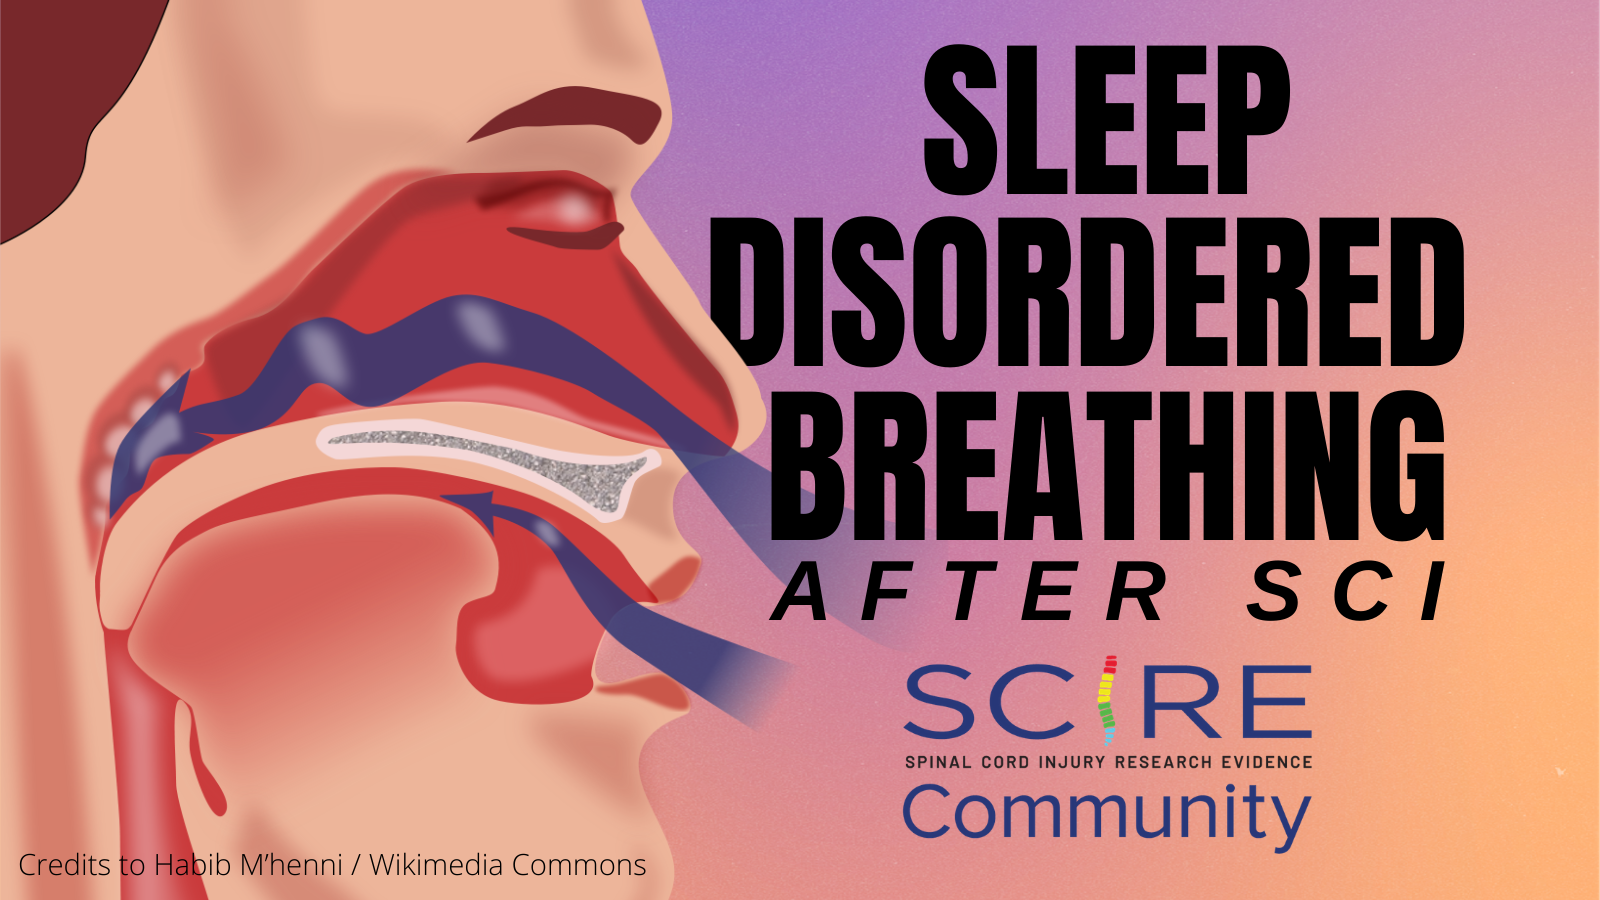 Background: purple, orange, and pink Left half: cartoon image of a person's side profile with the anatomy person's nasal cavity with air flowing in Text: Sleep Disordered Breathing After SCI SCIRE Community logo: Spinal Cord Injury Research Evidence